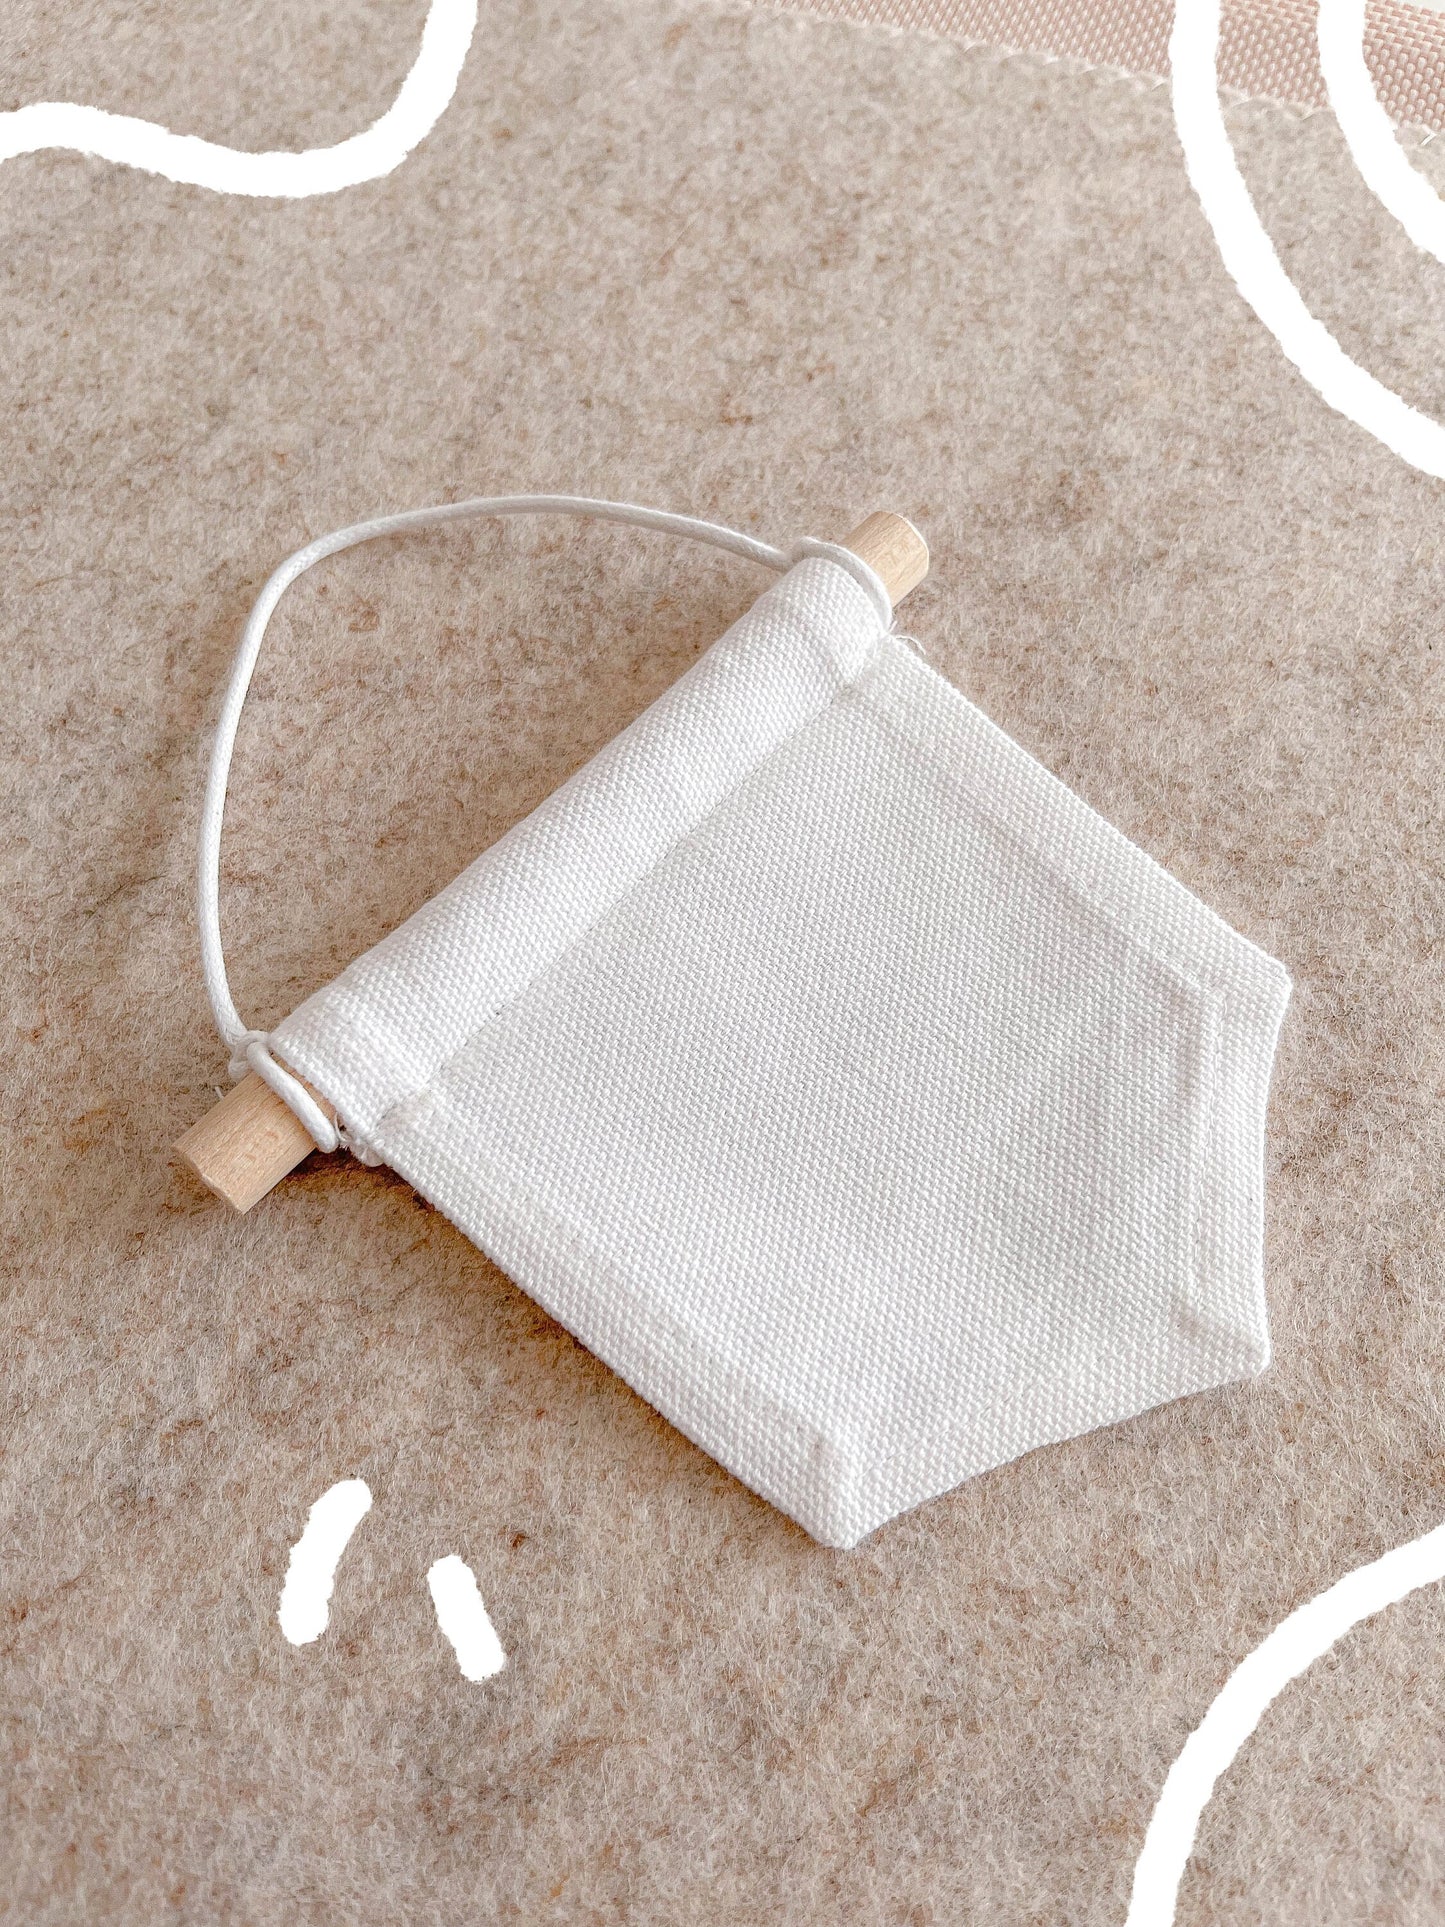 Cute Cotton Pin Banner | S 12cm x 10cm | Handmade in Germany | Off White Canvas Fabric | Classic Pin Display